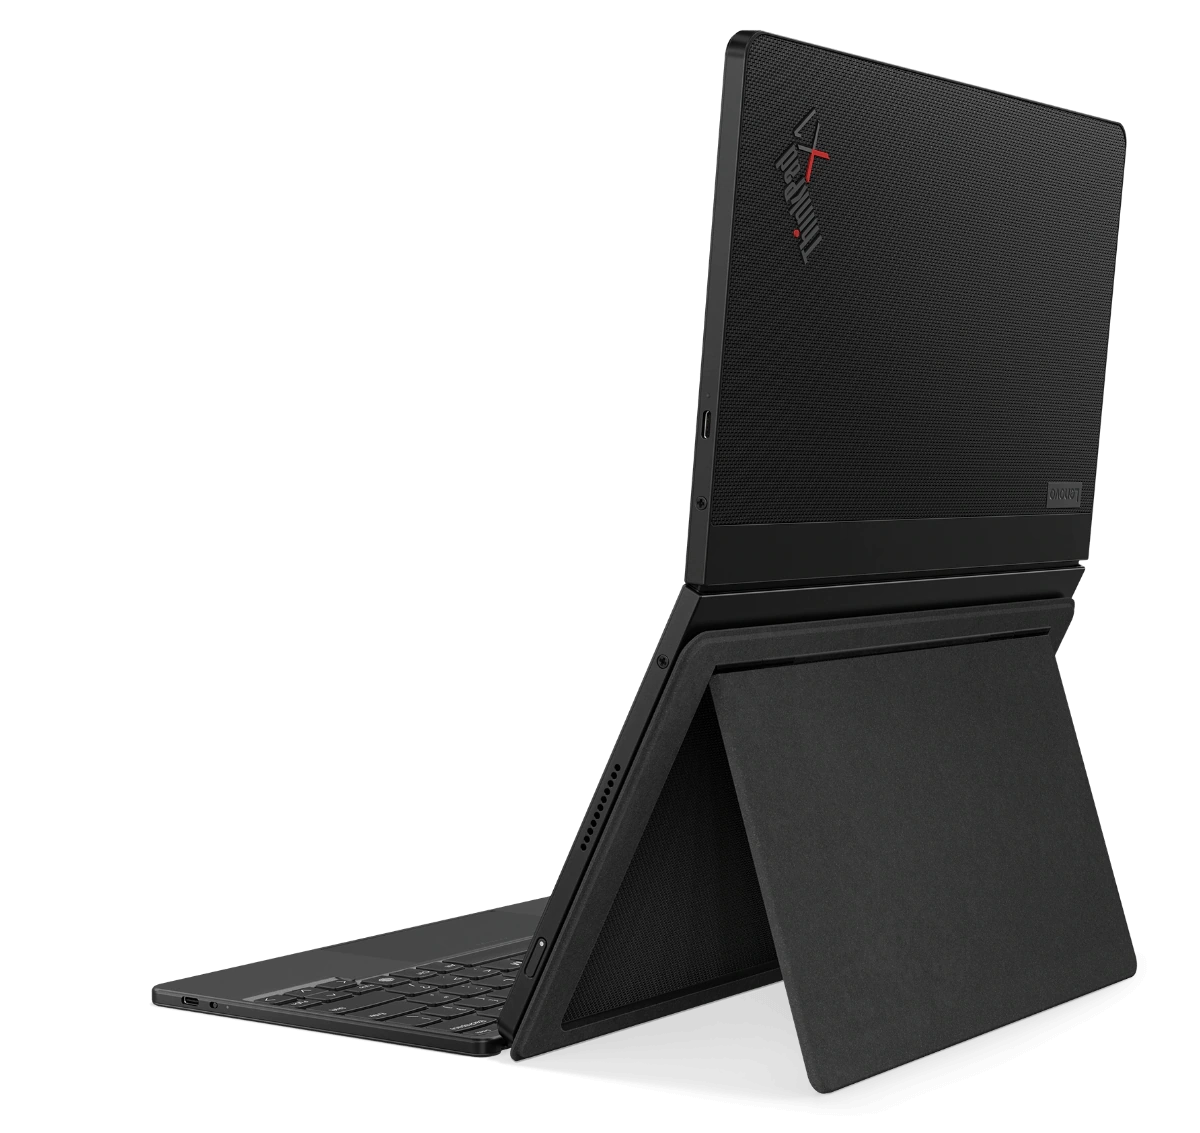 Right-rear view of the Lenovo ThinkPad X1 Fold in portrait mode showing kickstand in use, attached to optional keyboard.